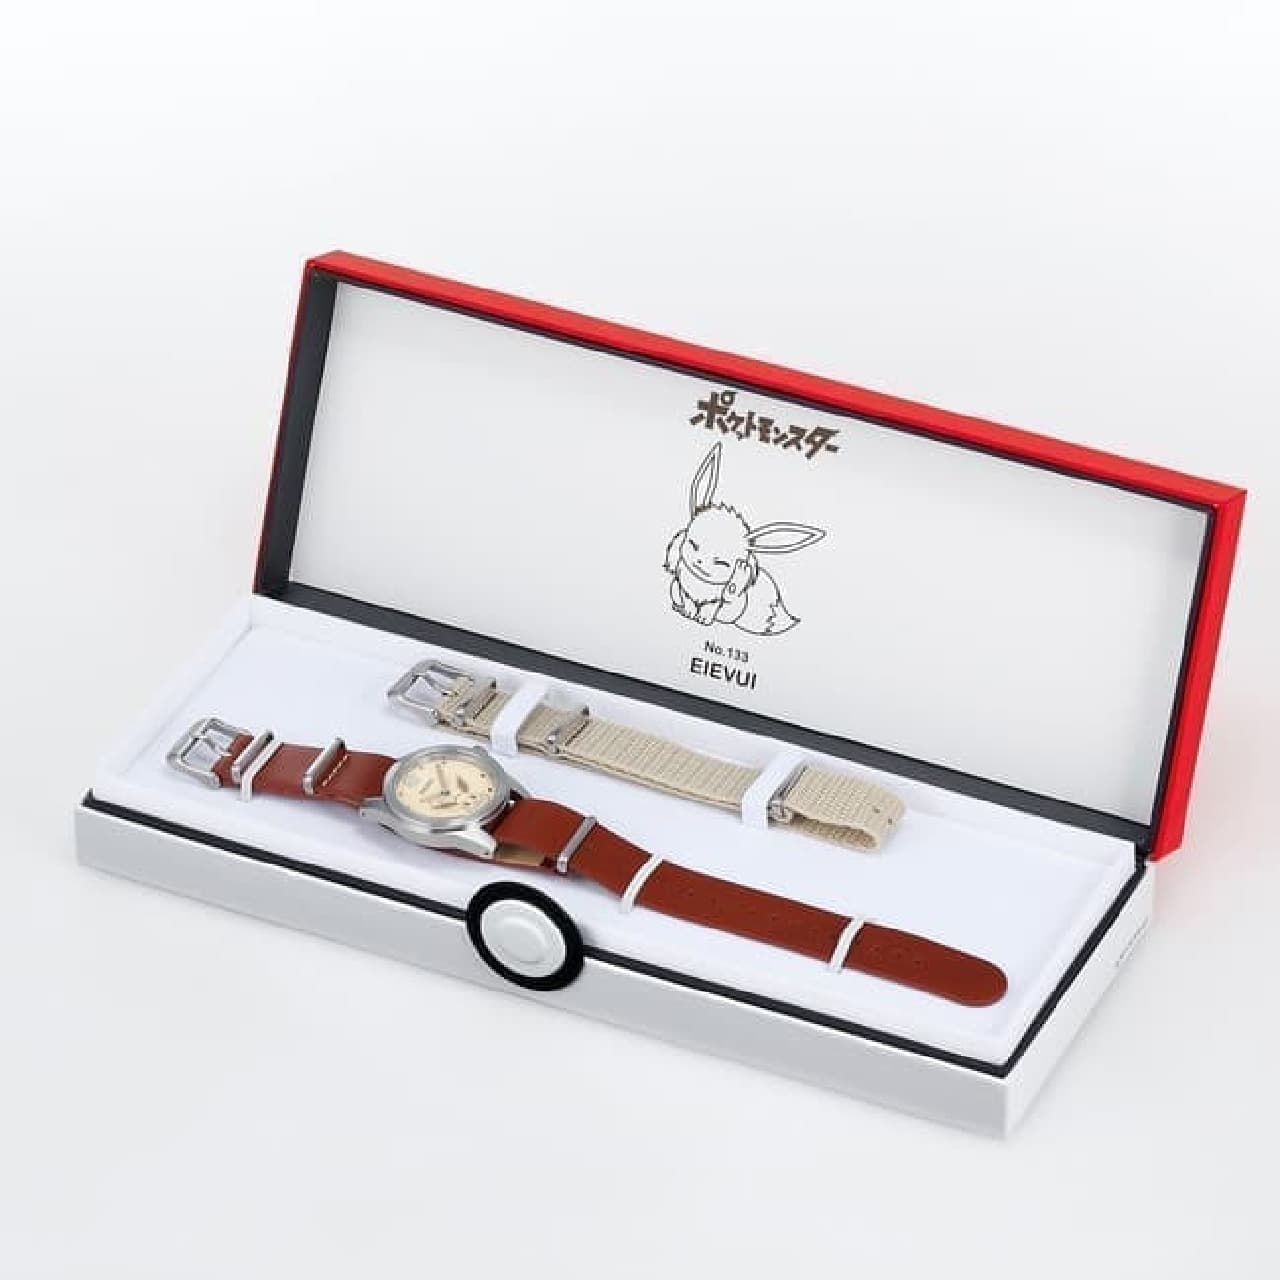 I'm happy with the fine details! "Seiko & Pokemon Special Model" Appears --4 types such as Pikachu and Eevee